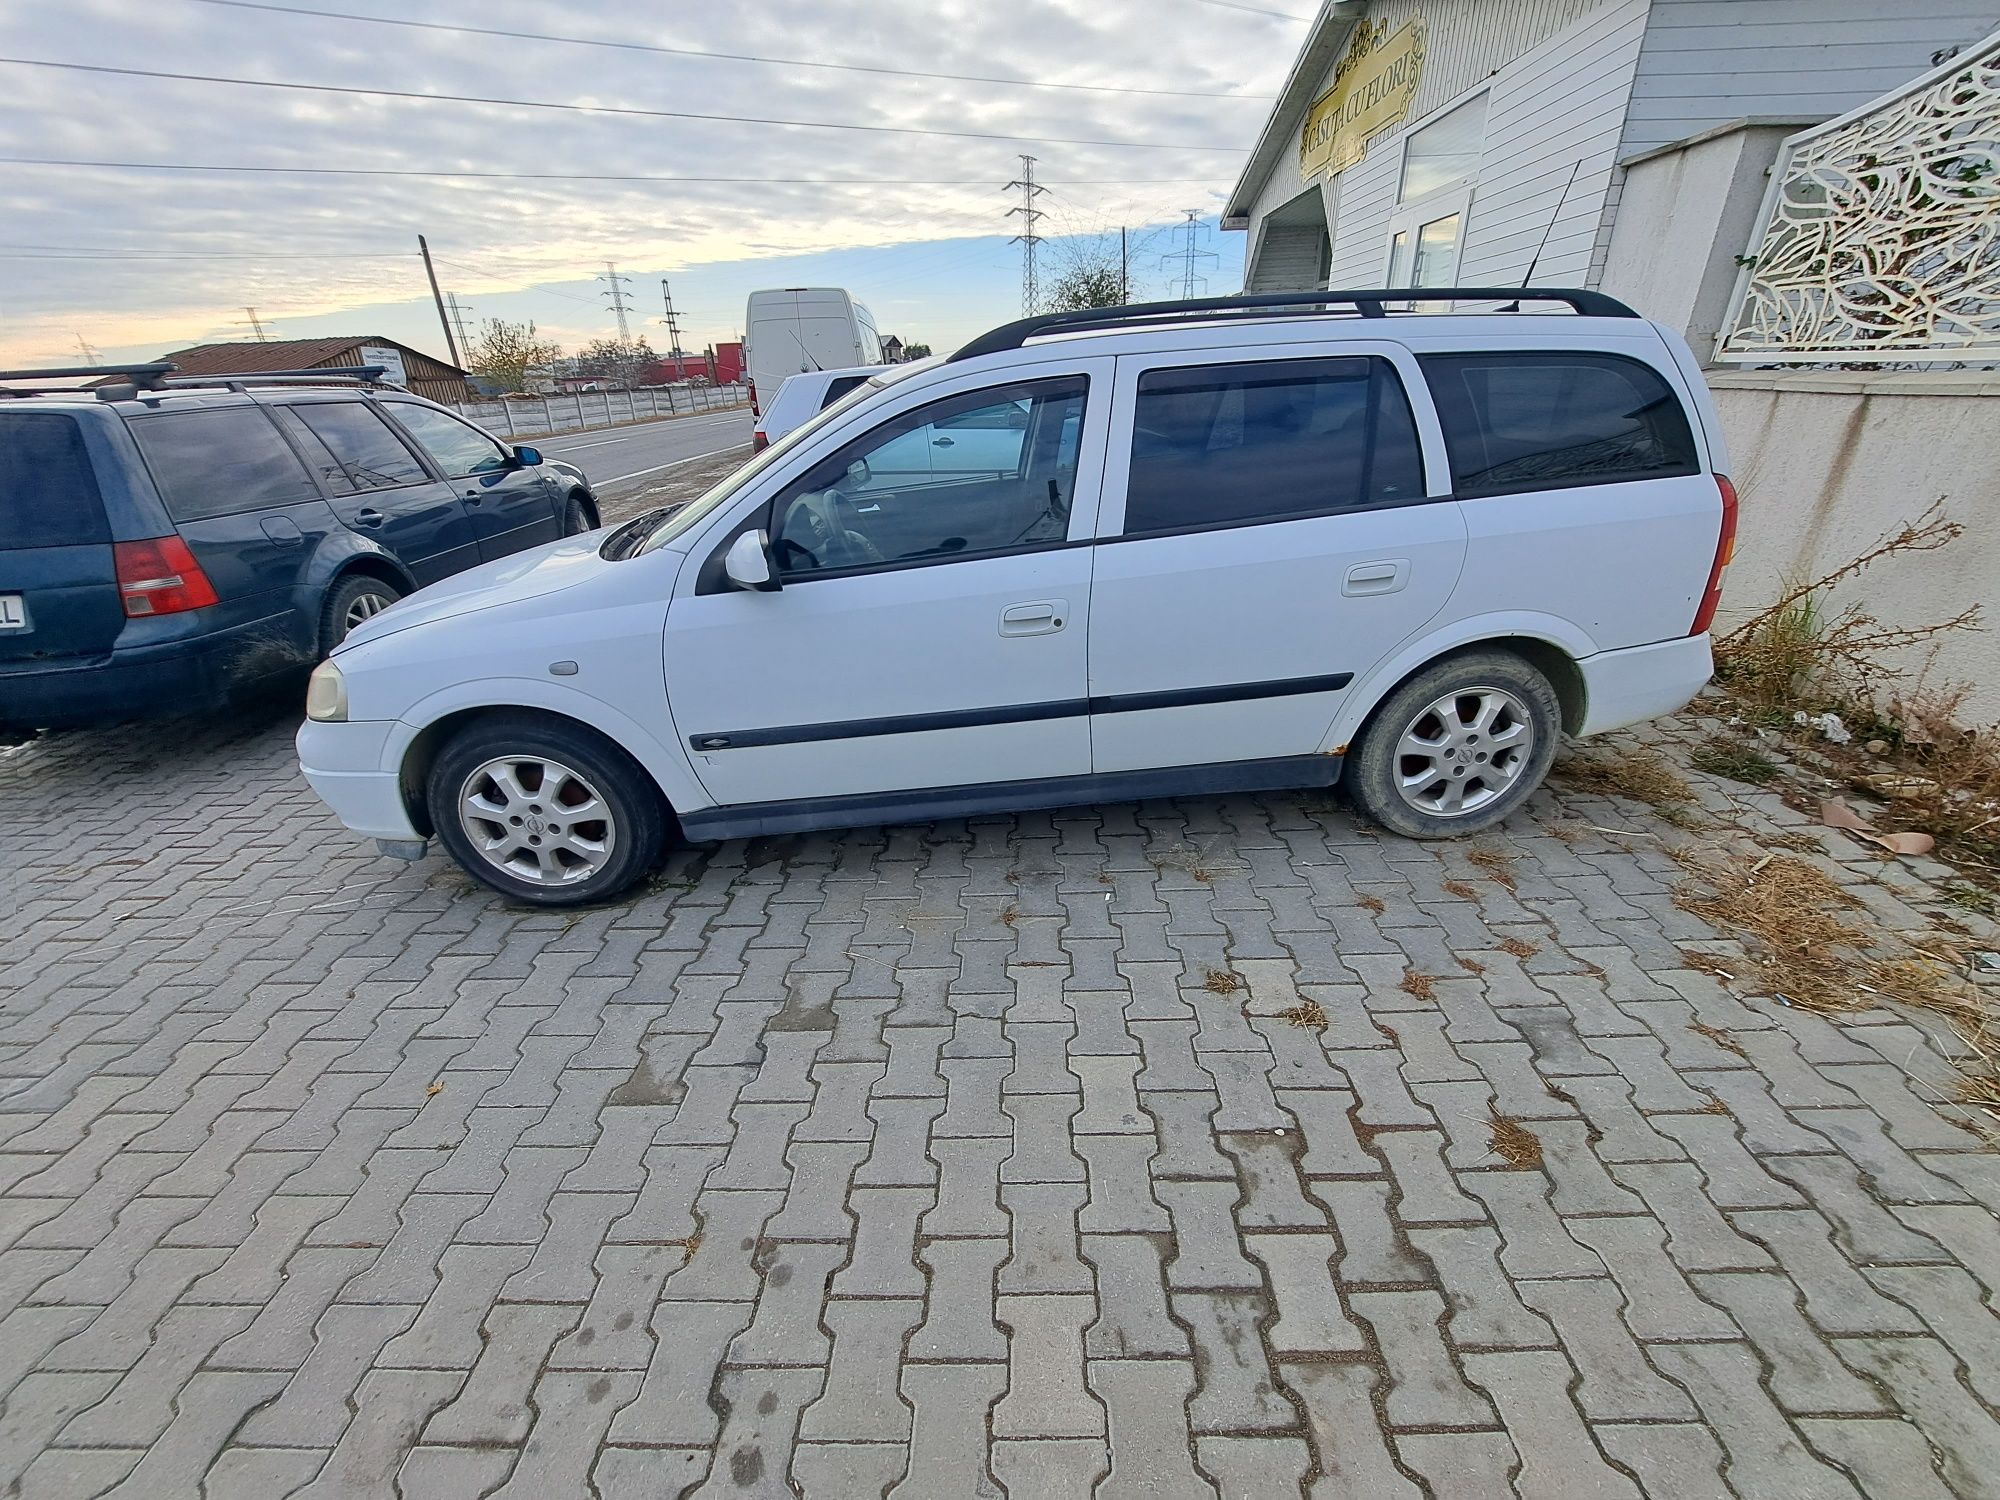 Opel astra G defect